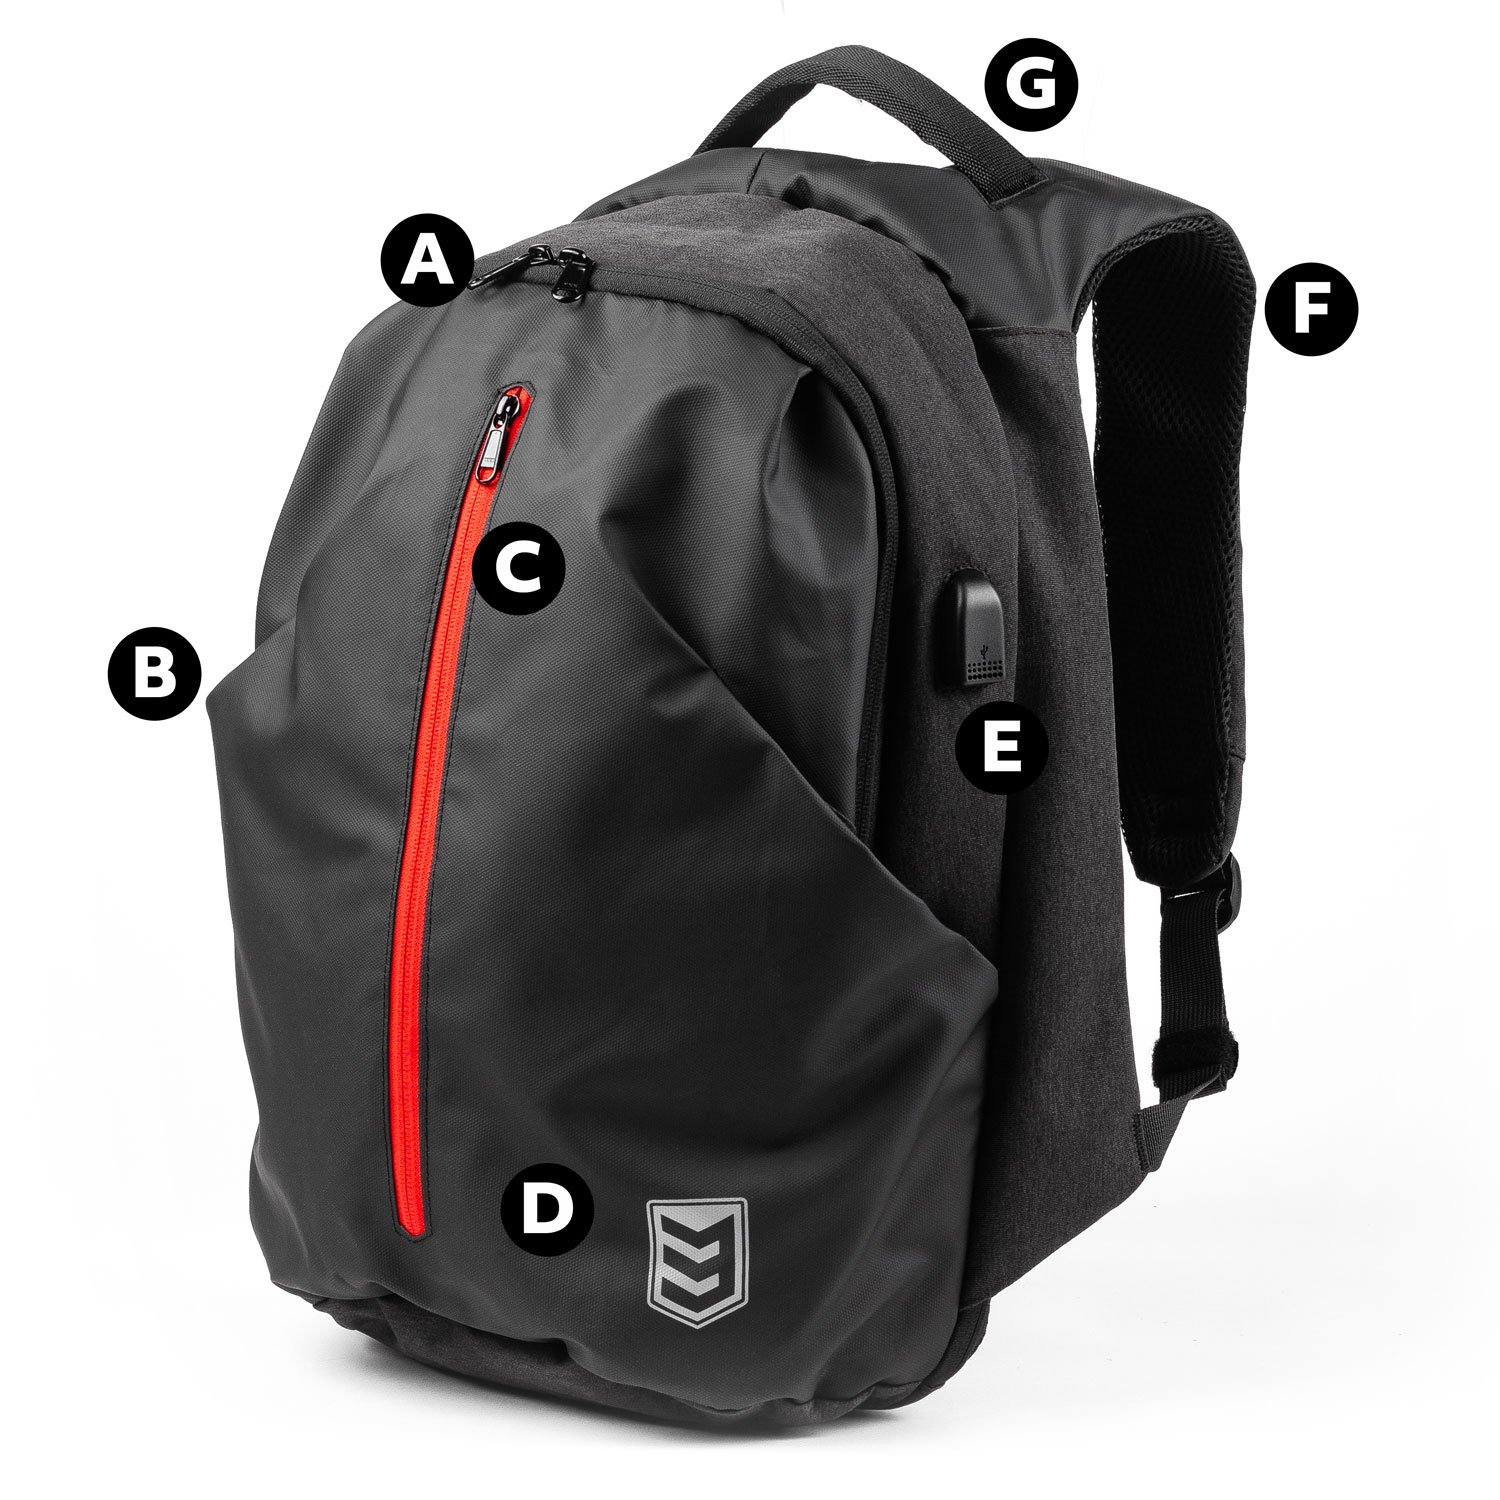 3V Gear Shield Anti-Theft Backpack